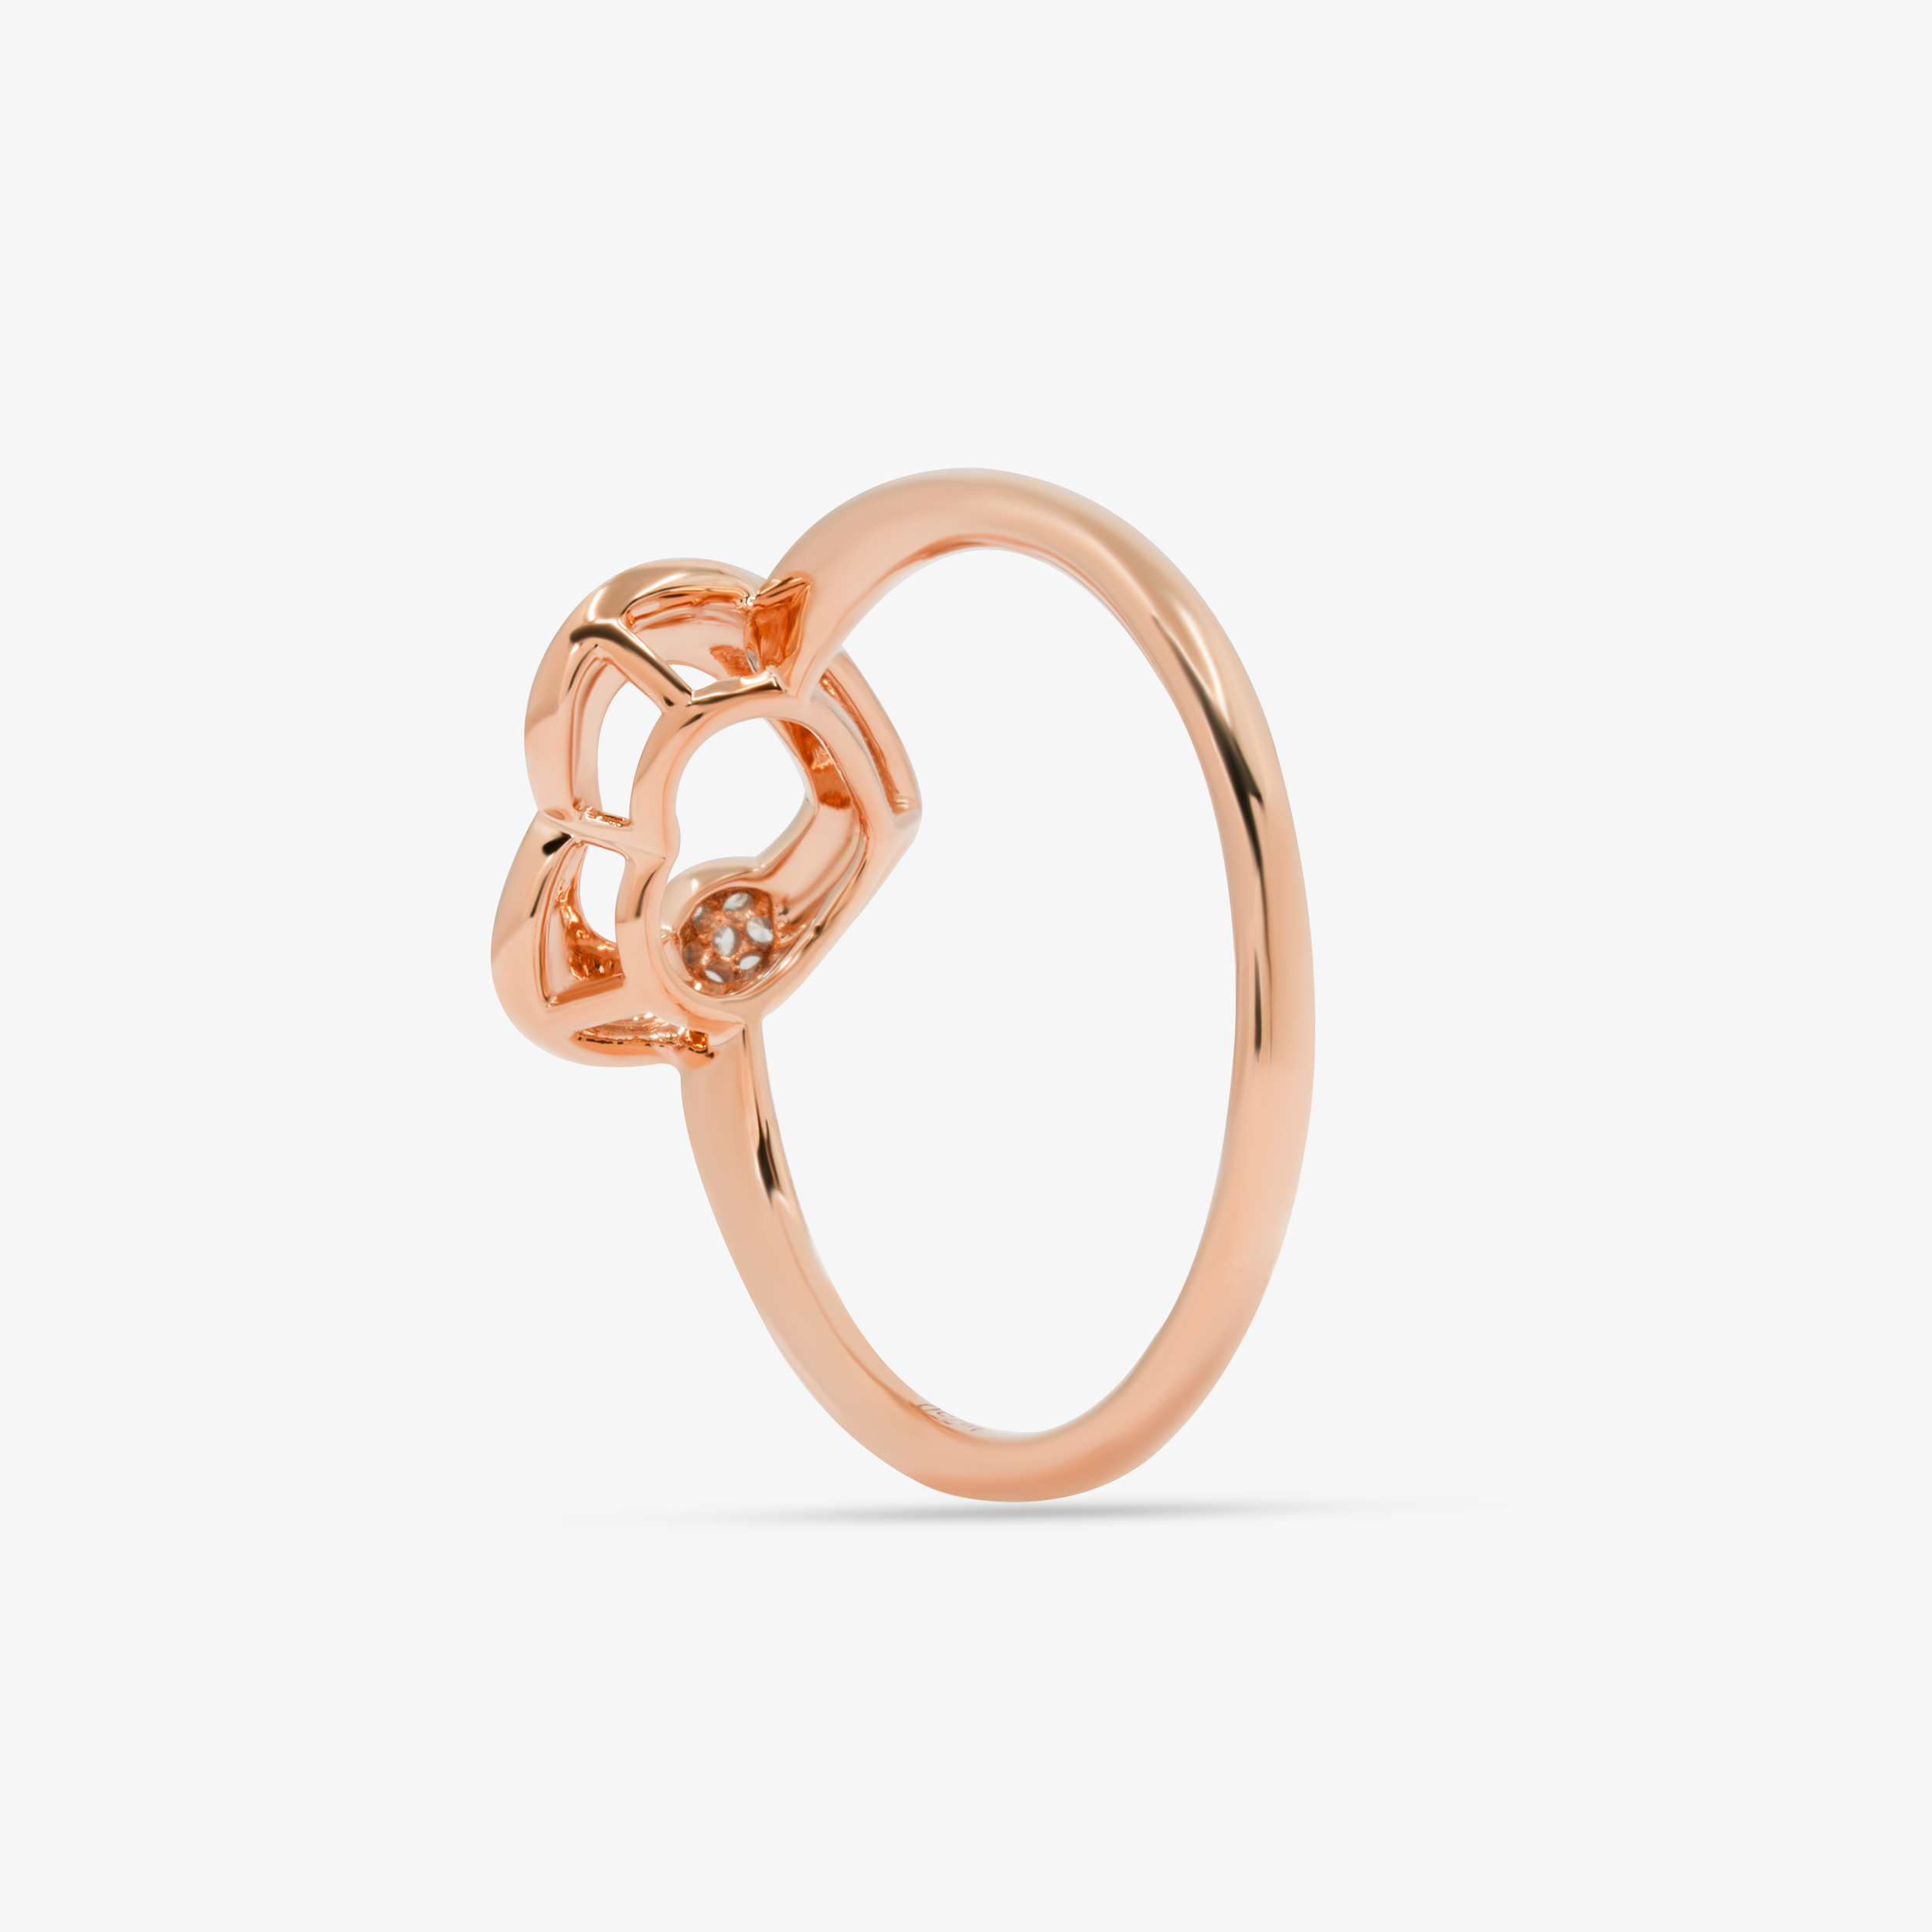 Heart Ring In 18K Solid Rose Gold With Diamonds